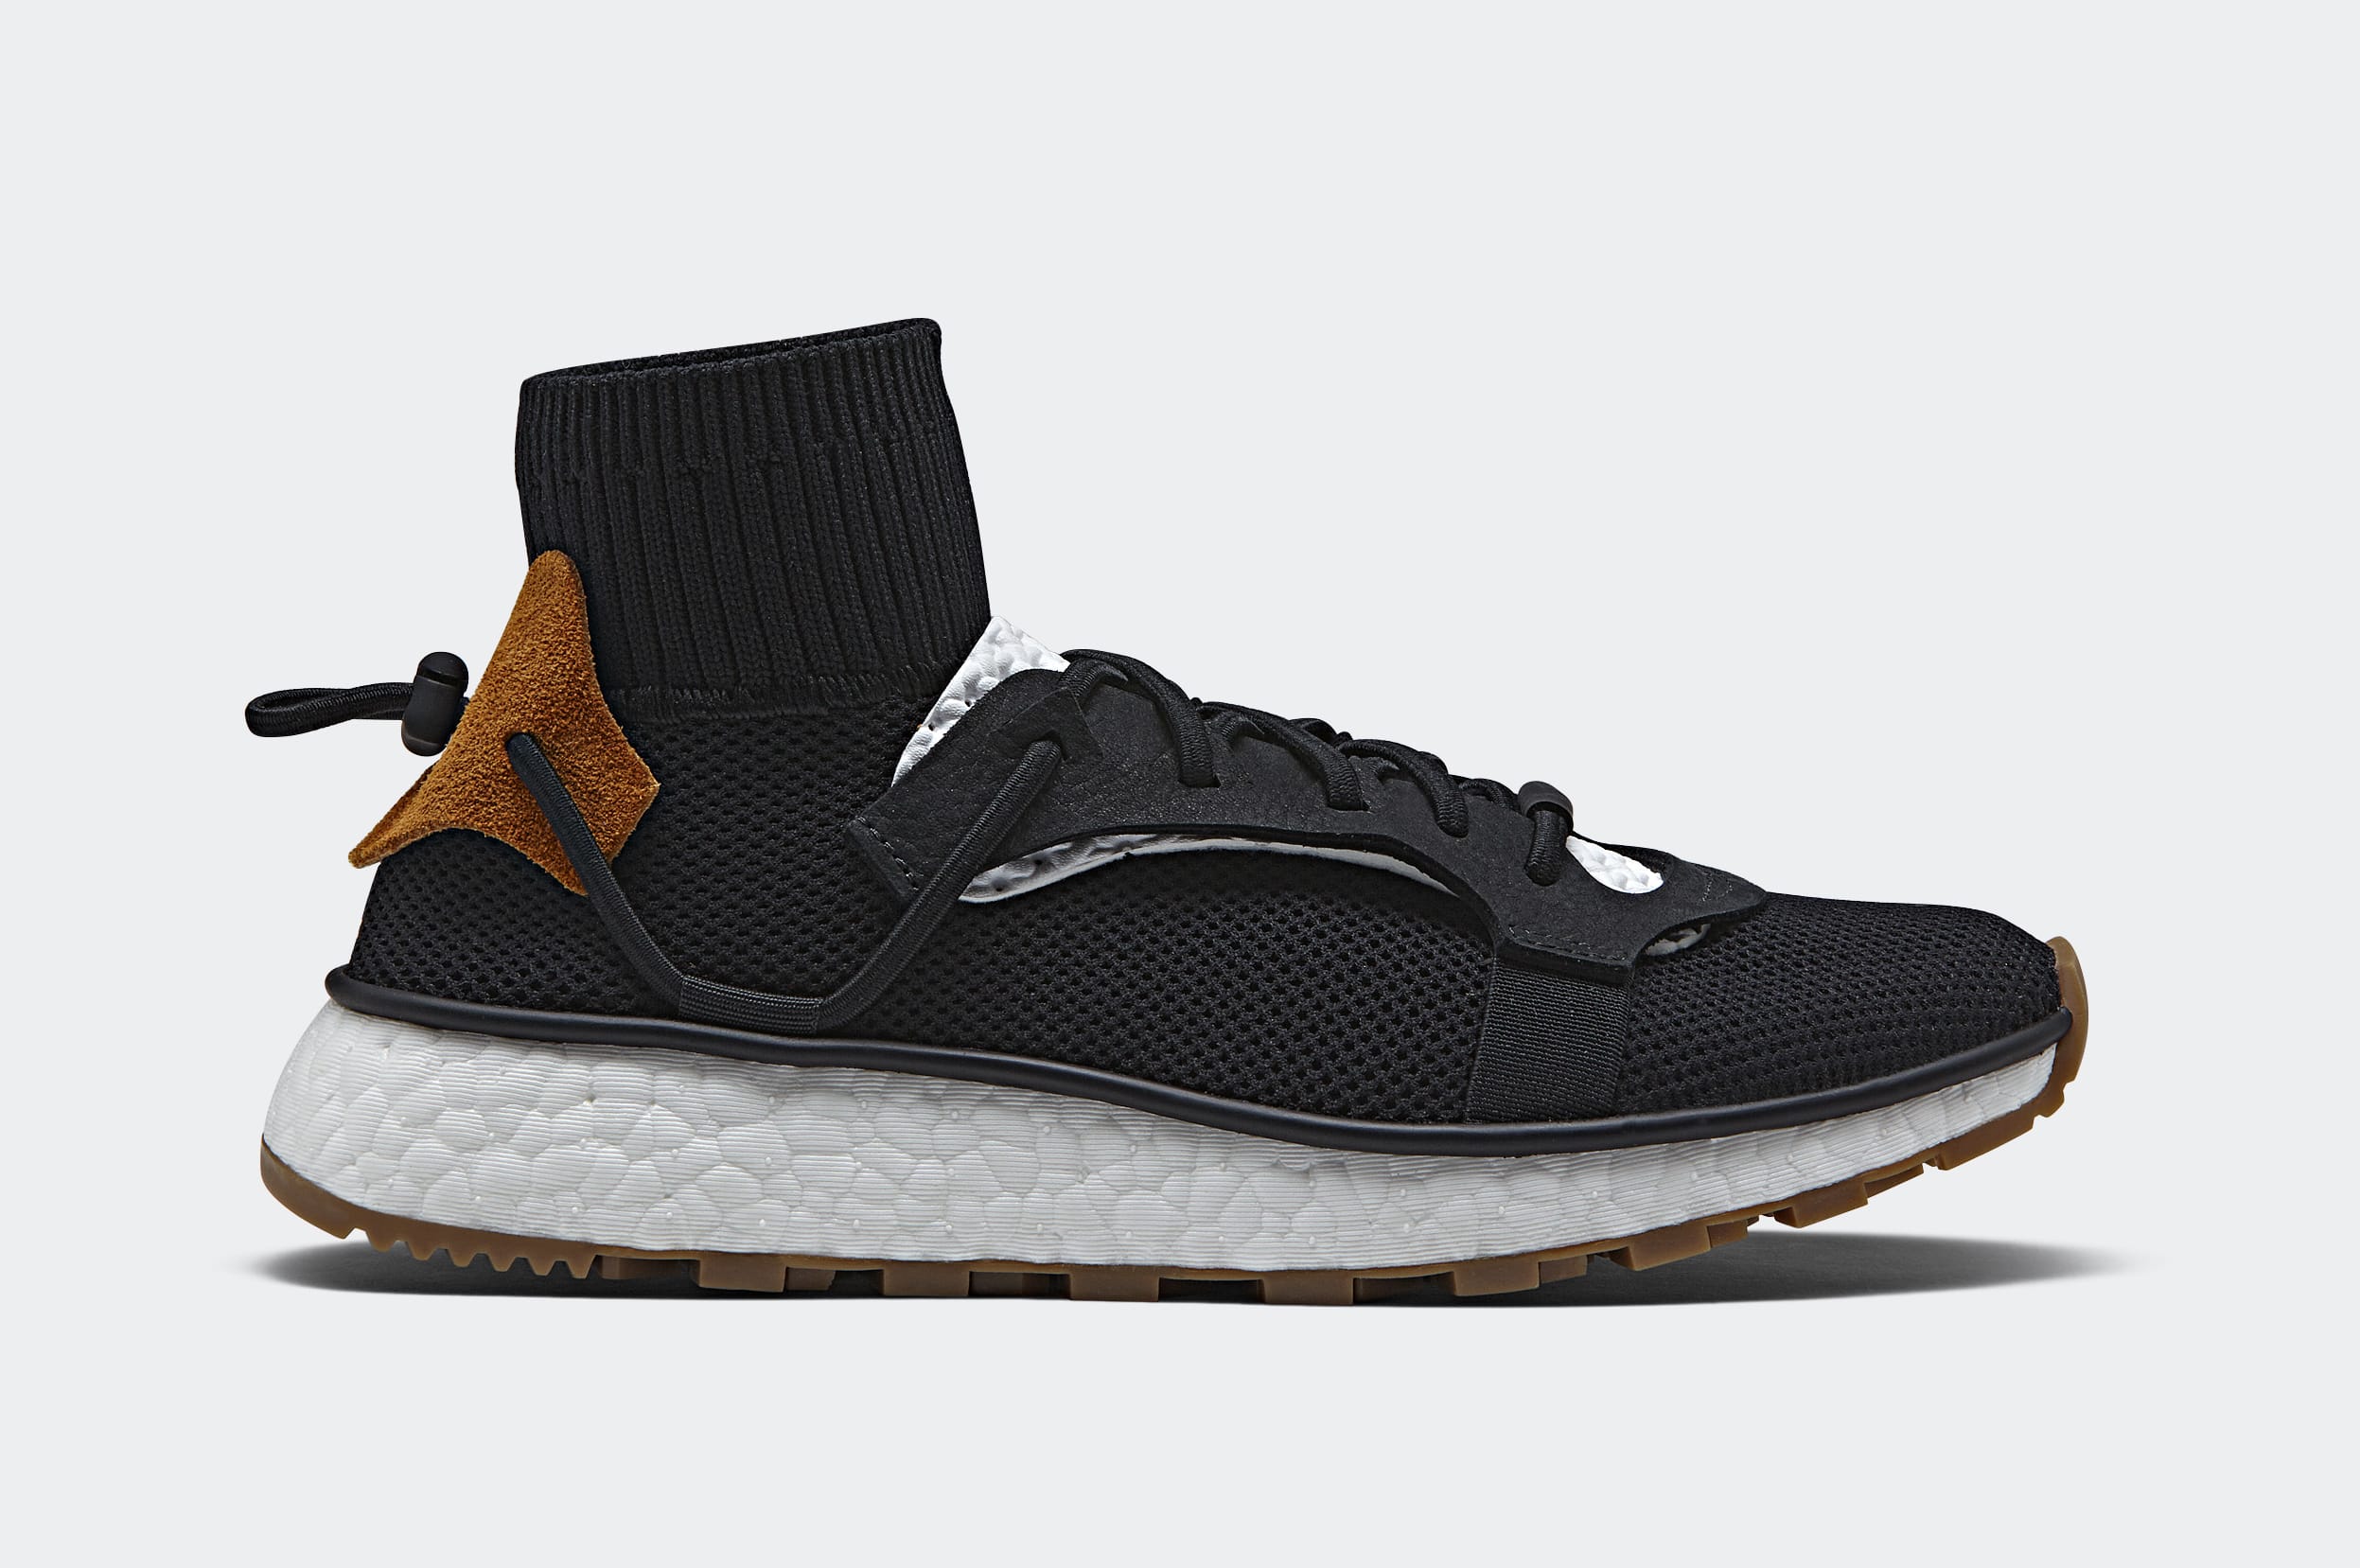 Humanistic Must Mayor Adidas Originals by Alexander Wang Collection | Sole Collector